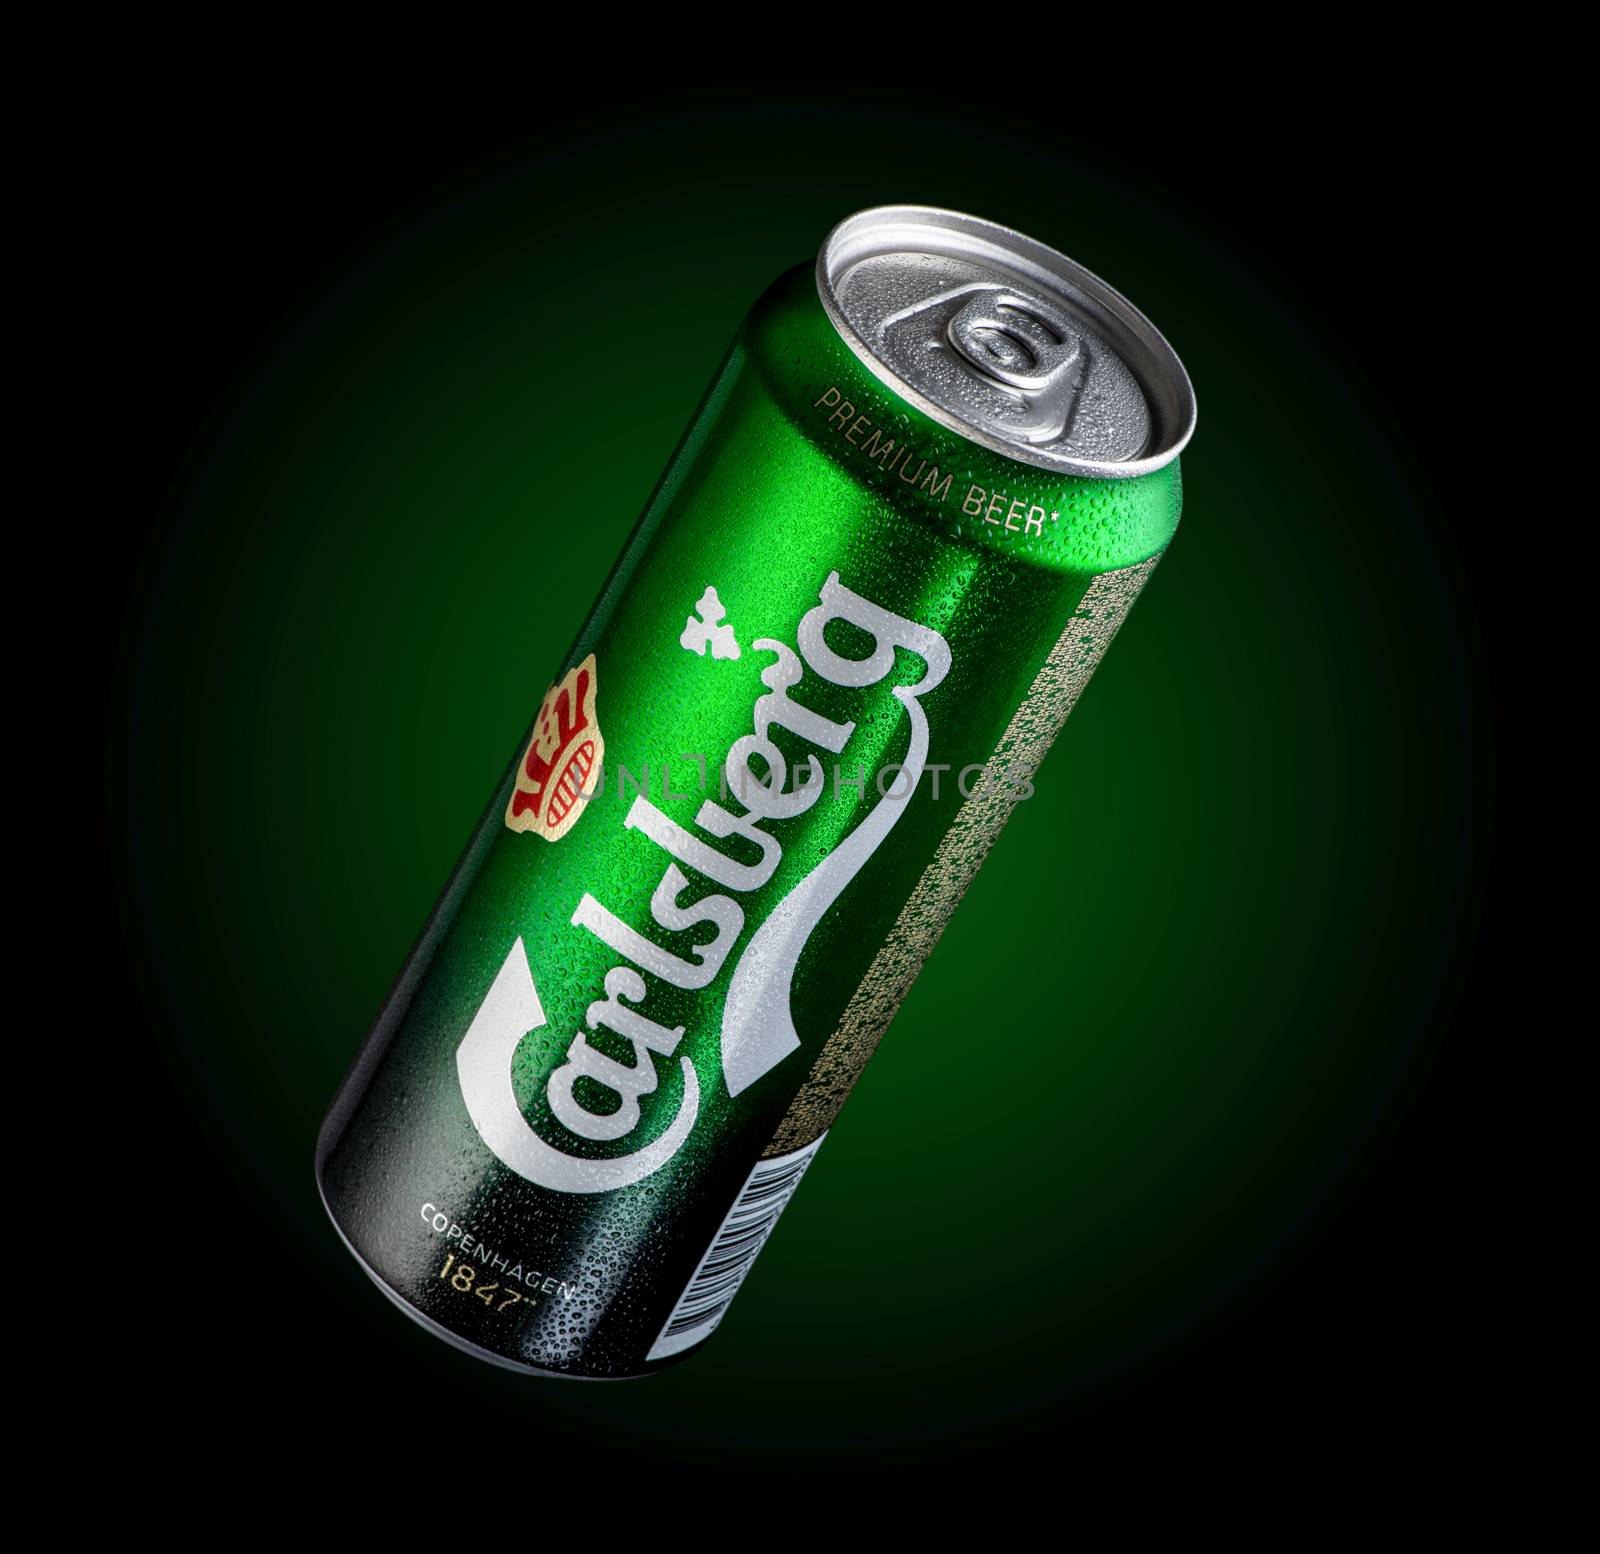 Almaty, Kazakhstan - October 11, 2019: can of beer Carlsberg with drops of water in a green background with illumination. Advertising a brand of beer